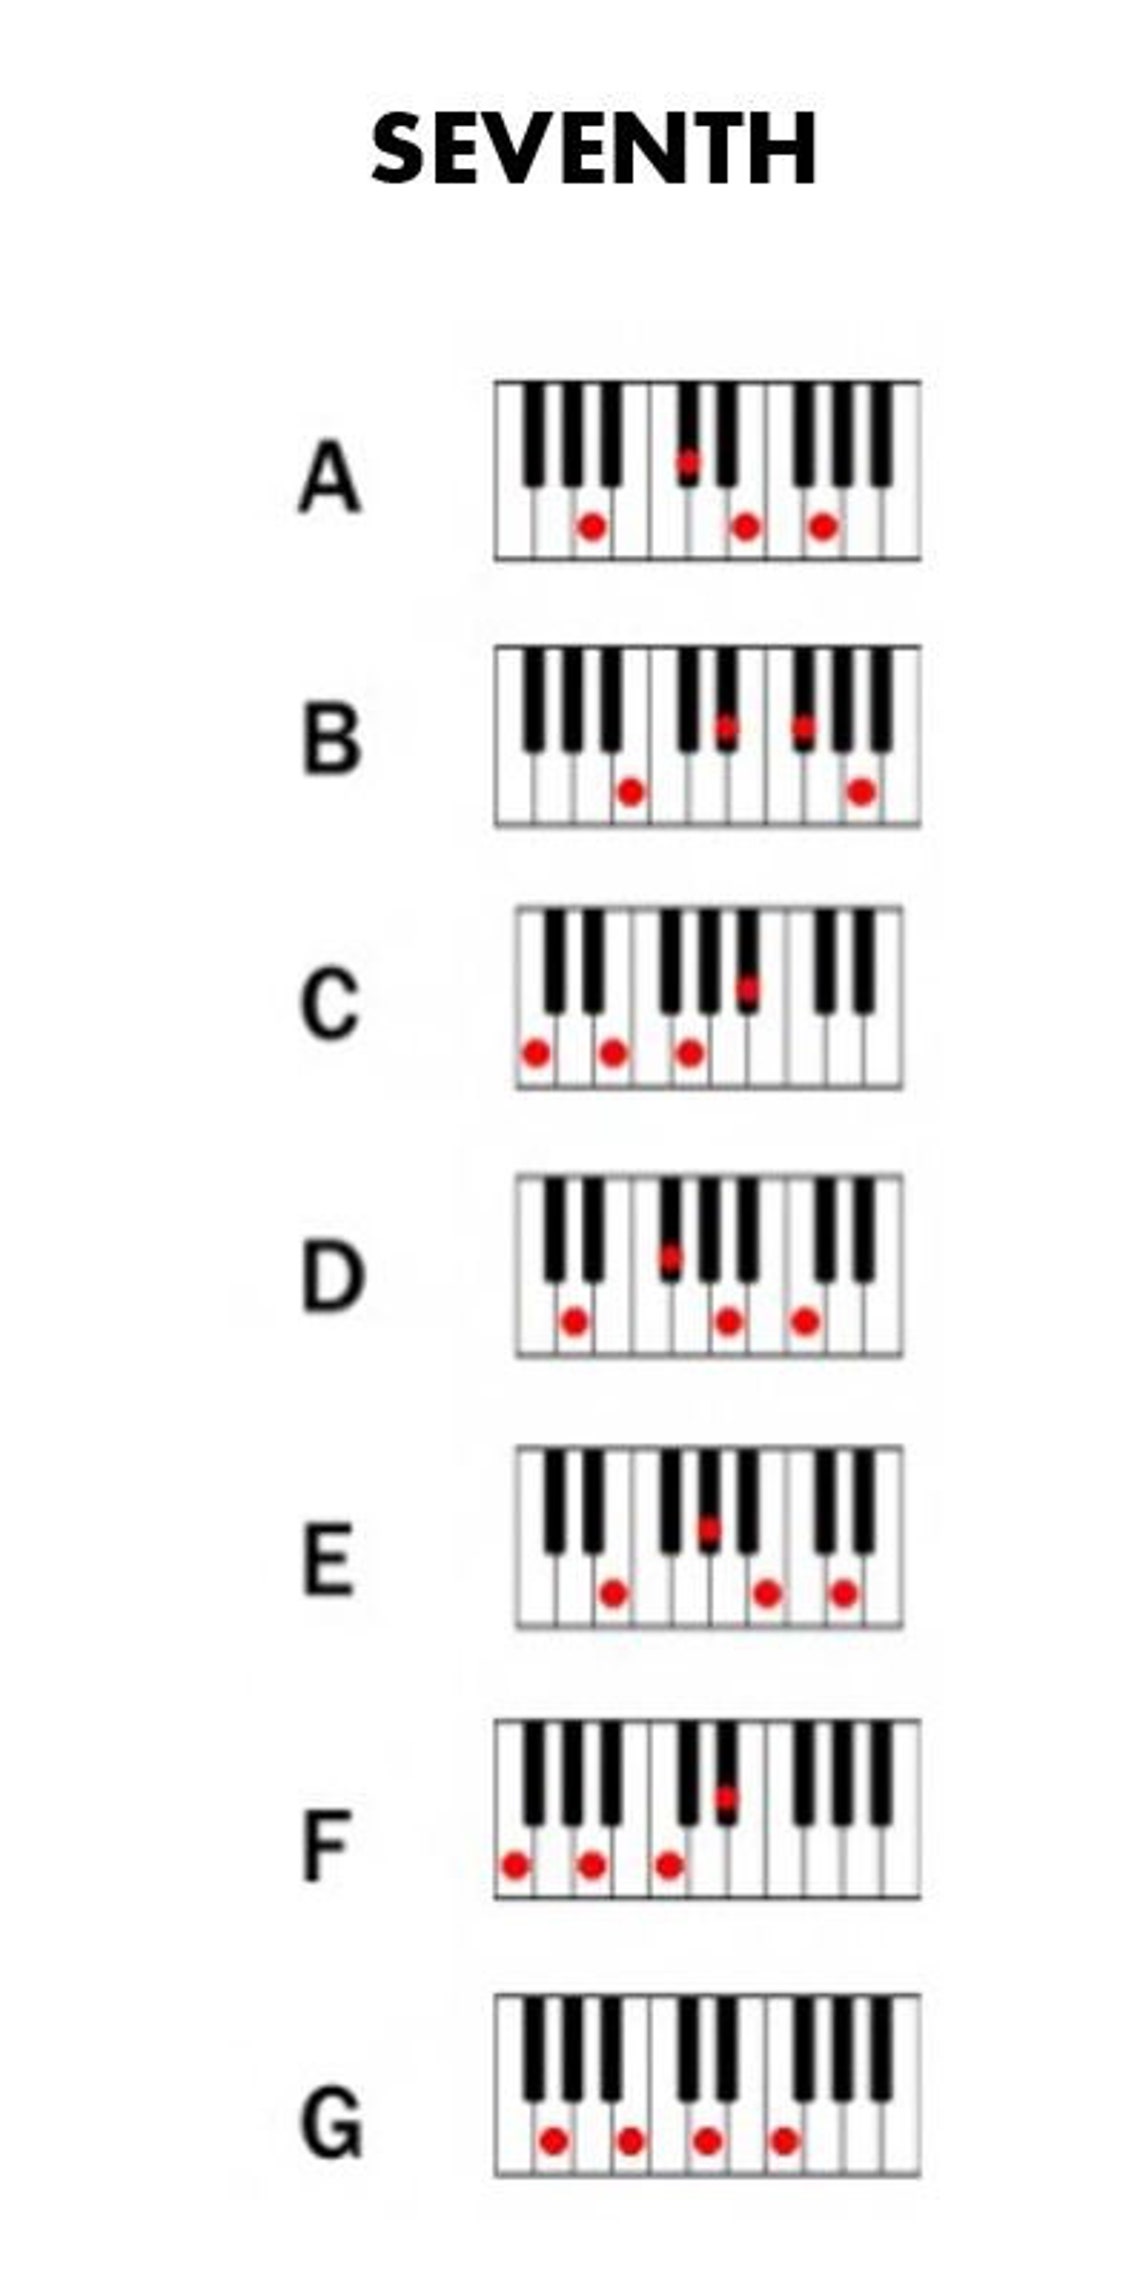 Learn How To Play Piano Chords Chart For Keyboard Etsy